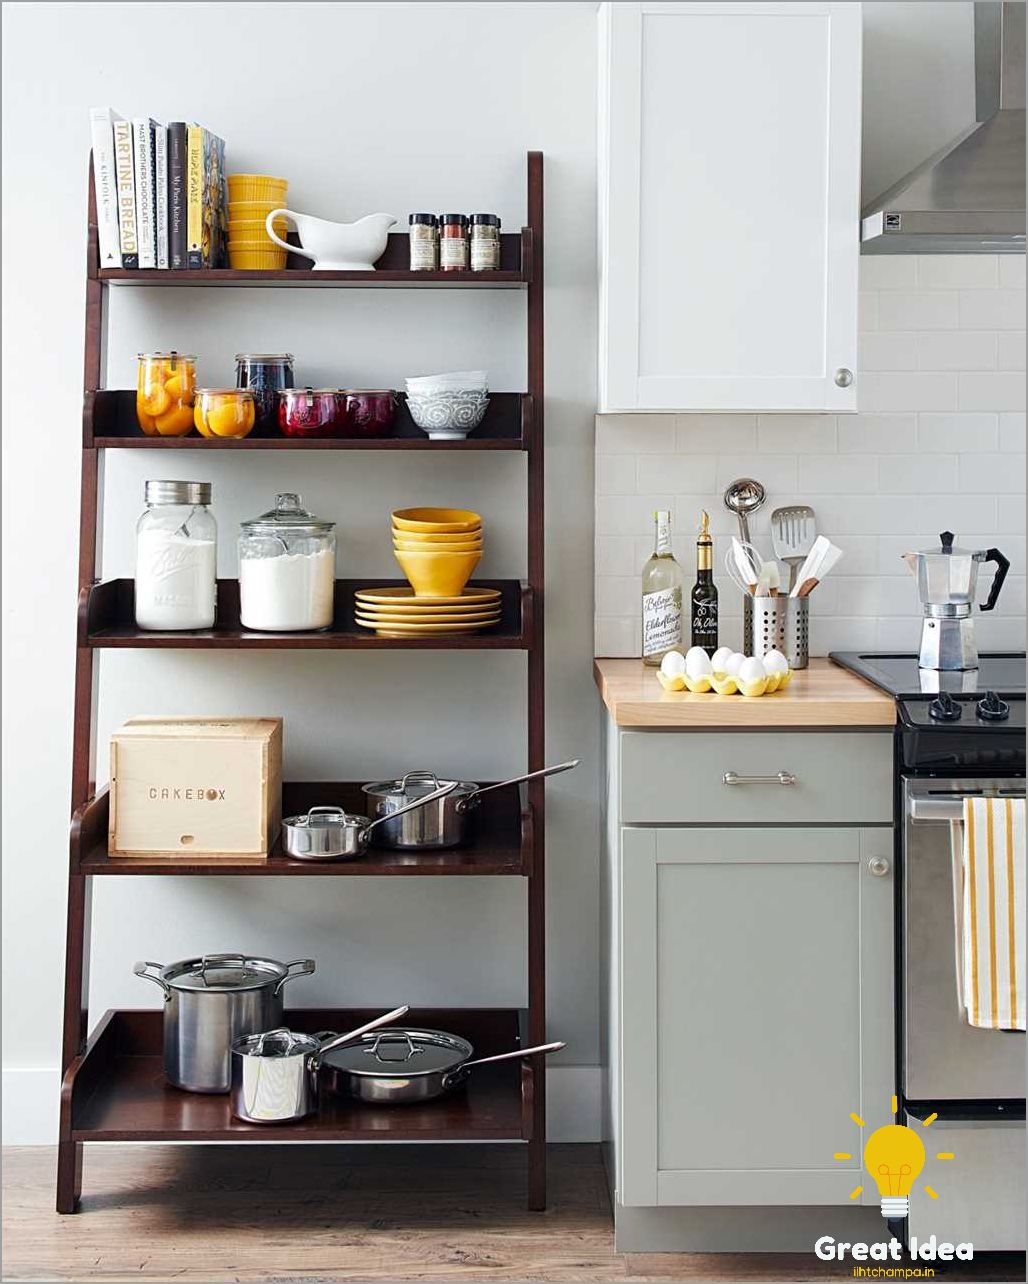 7. Consider a pull-out pantry